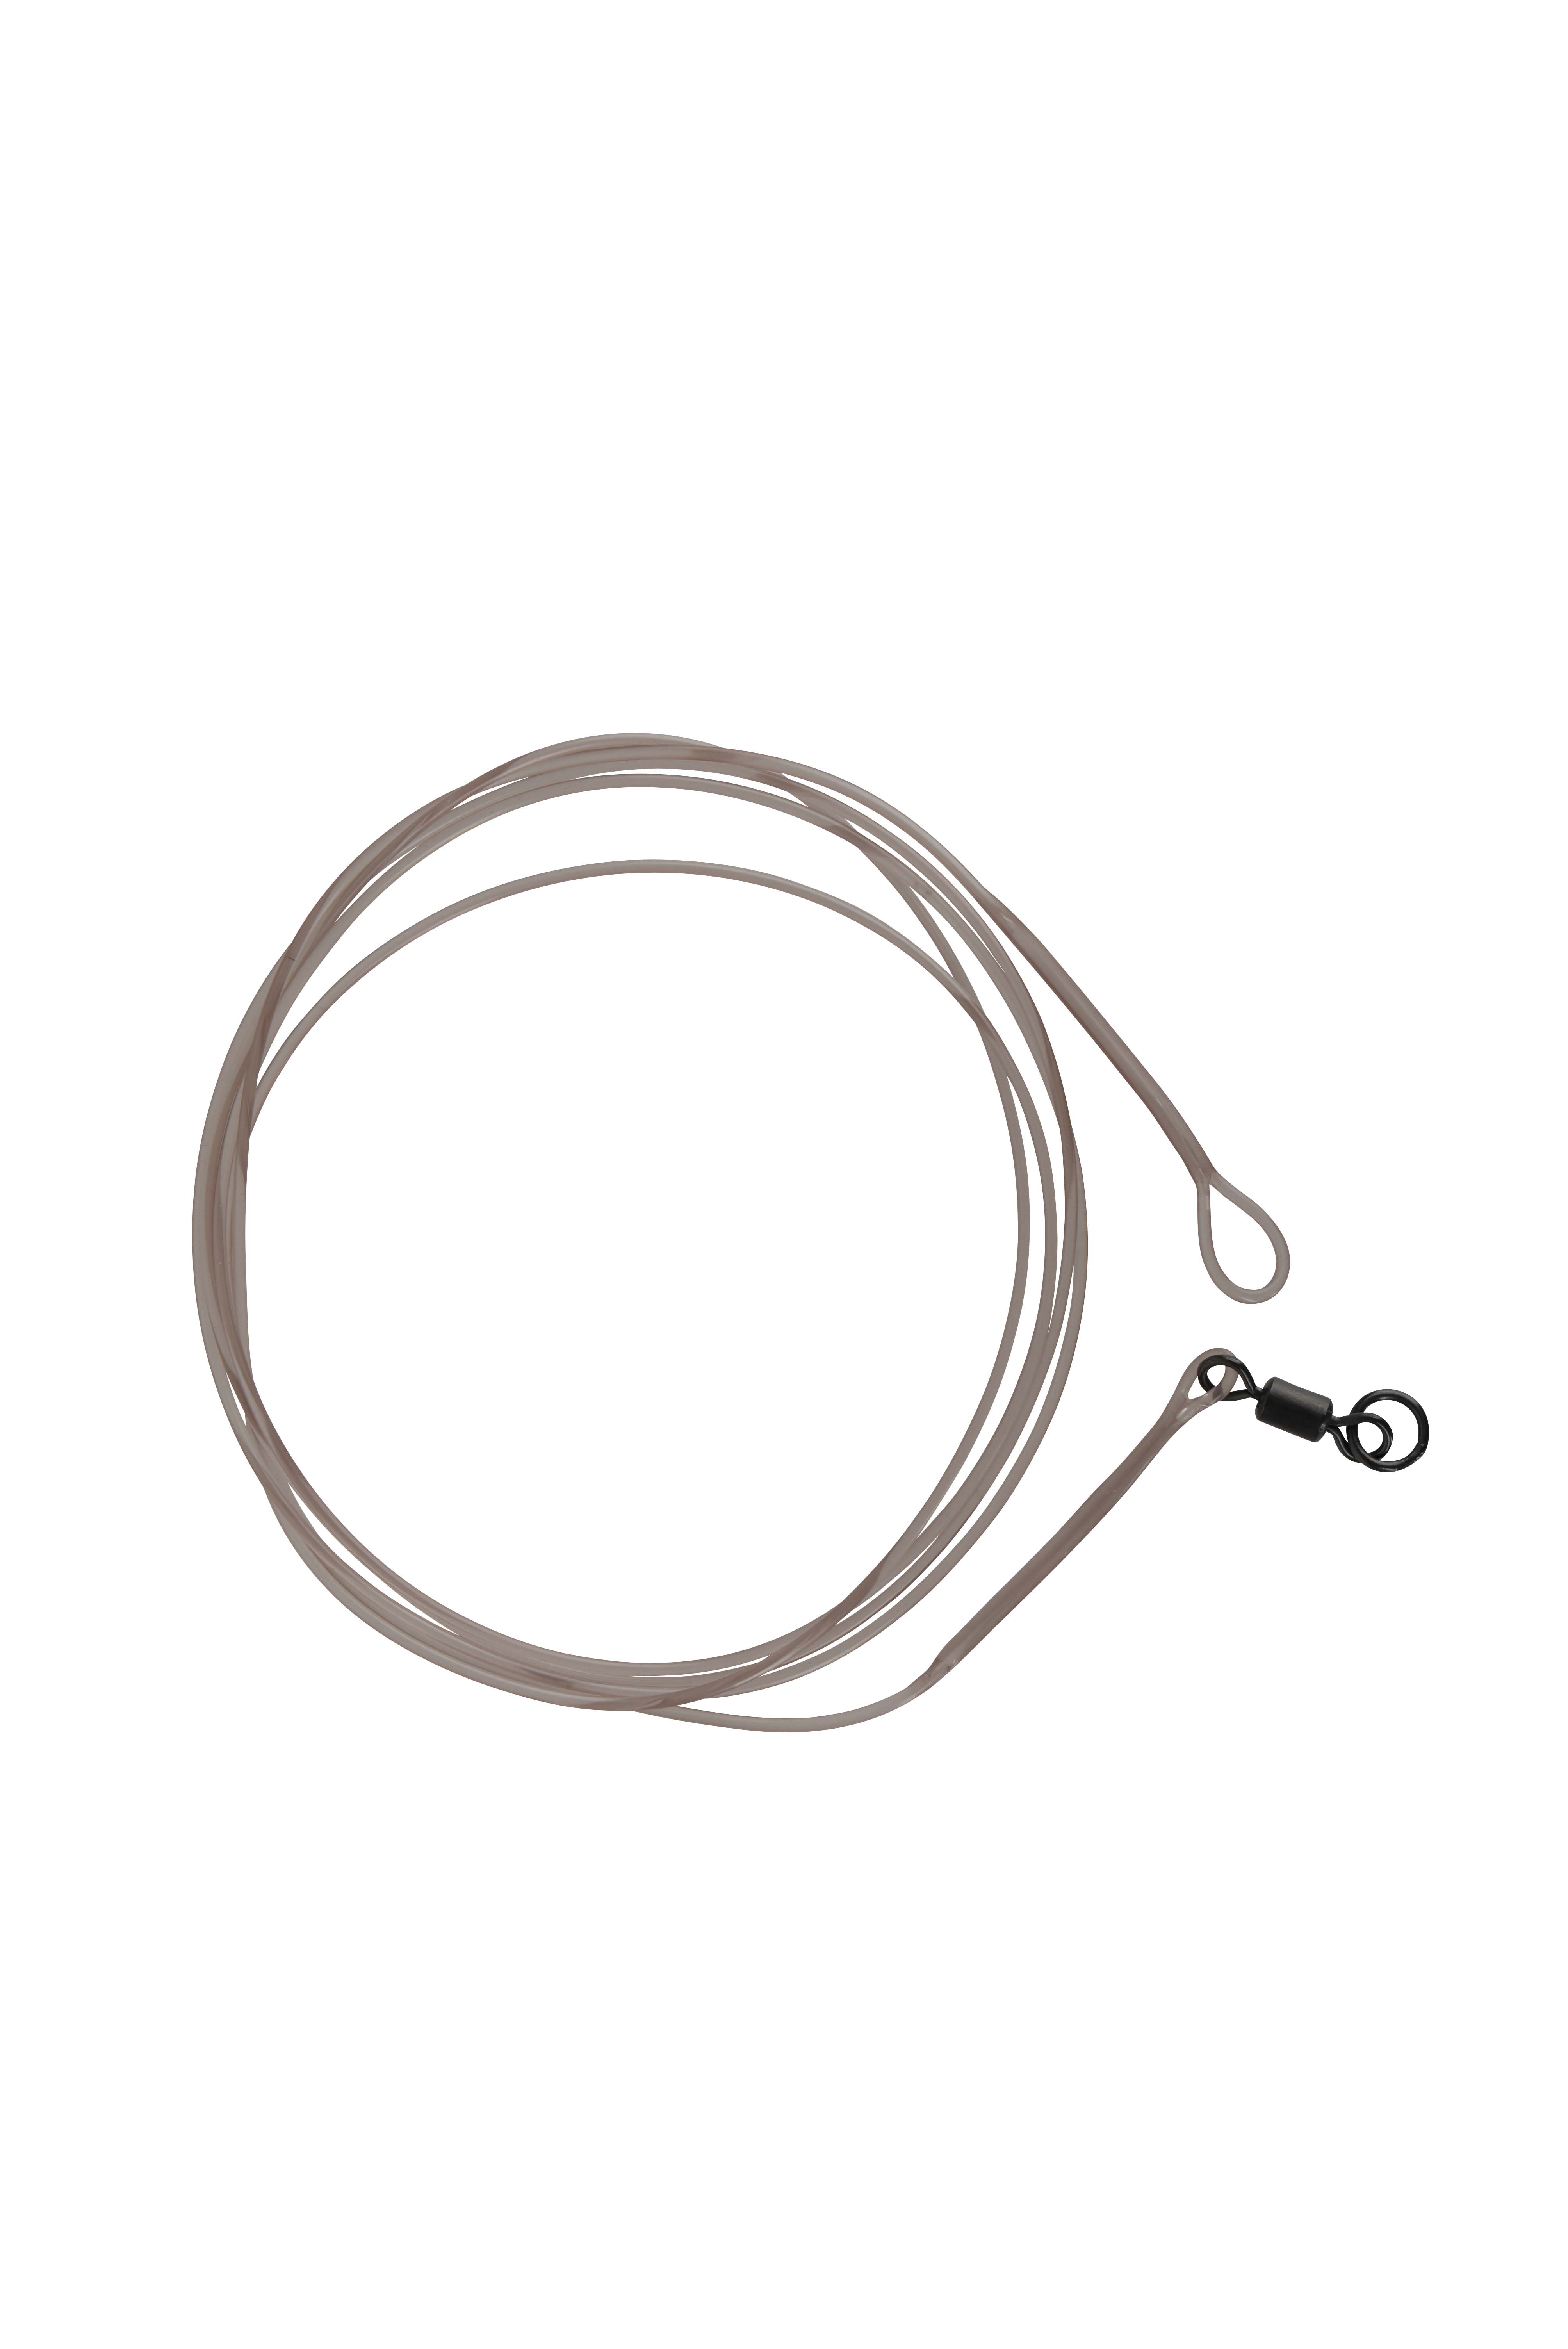 PROLOGIC LM MIRAGE LOOP LEADER 100CM 45LBS WITH RING SWIVEL